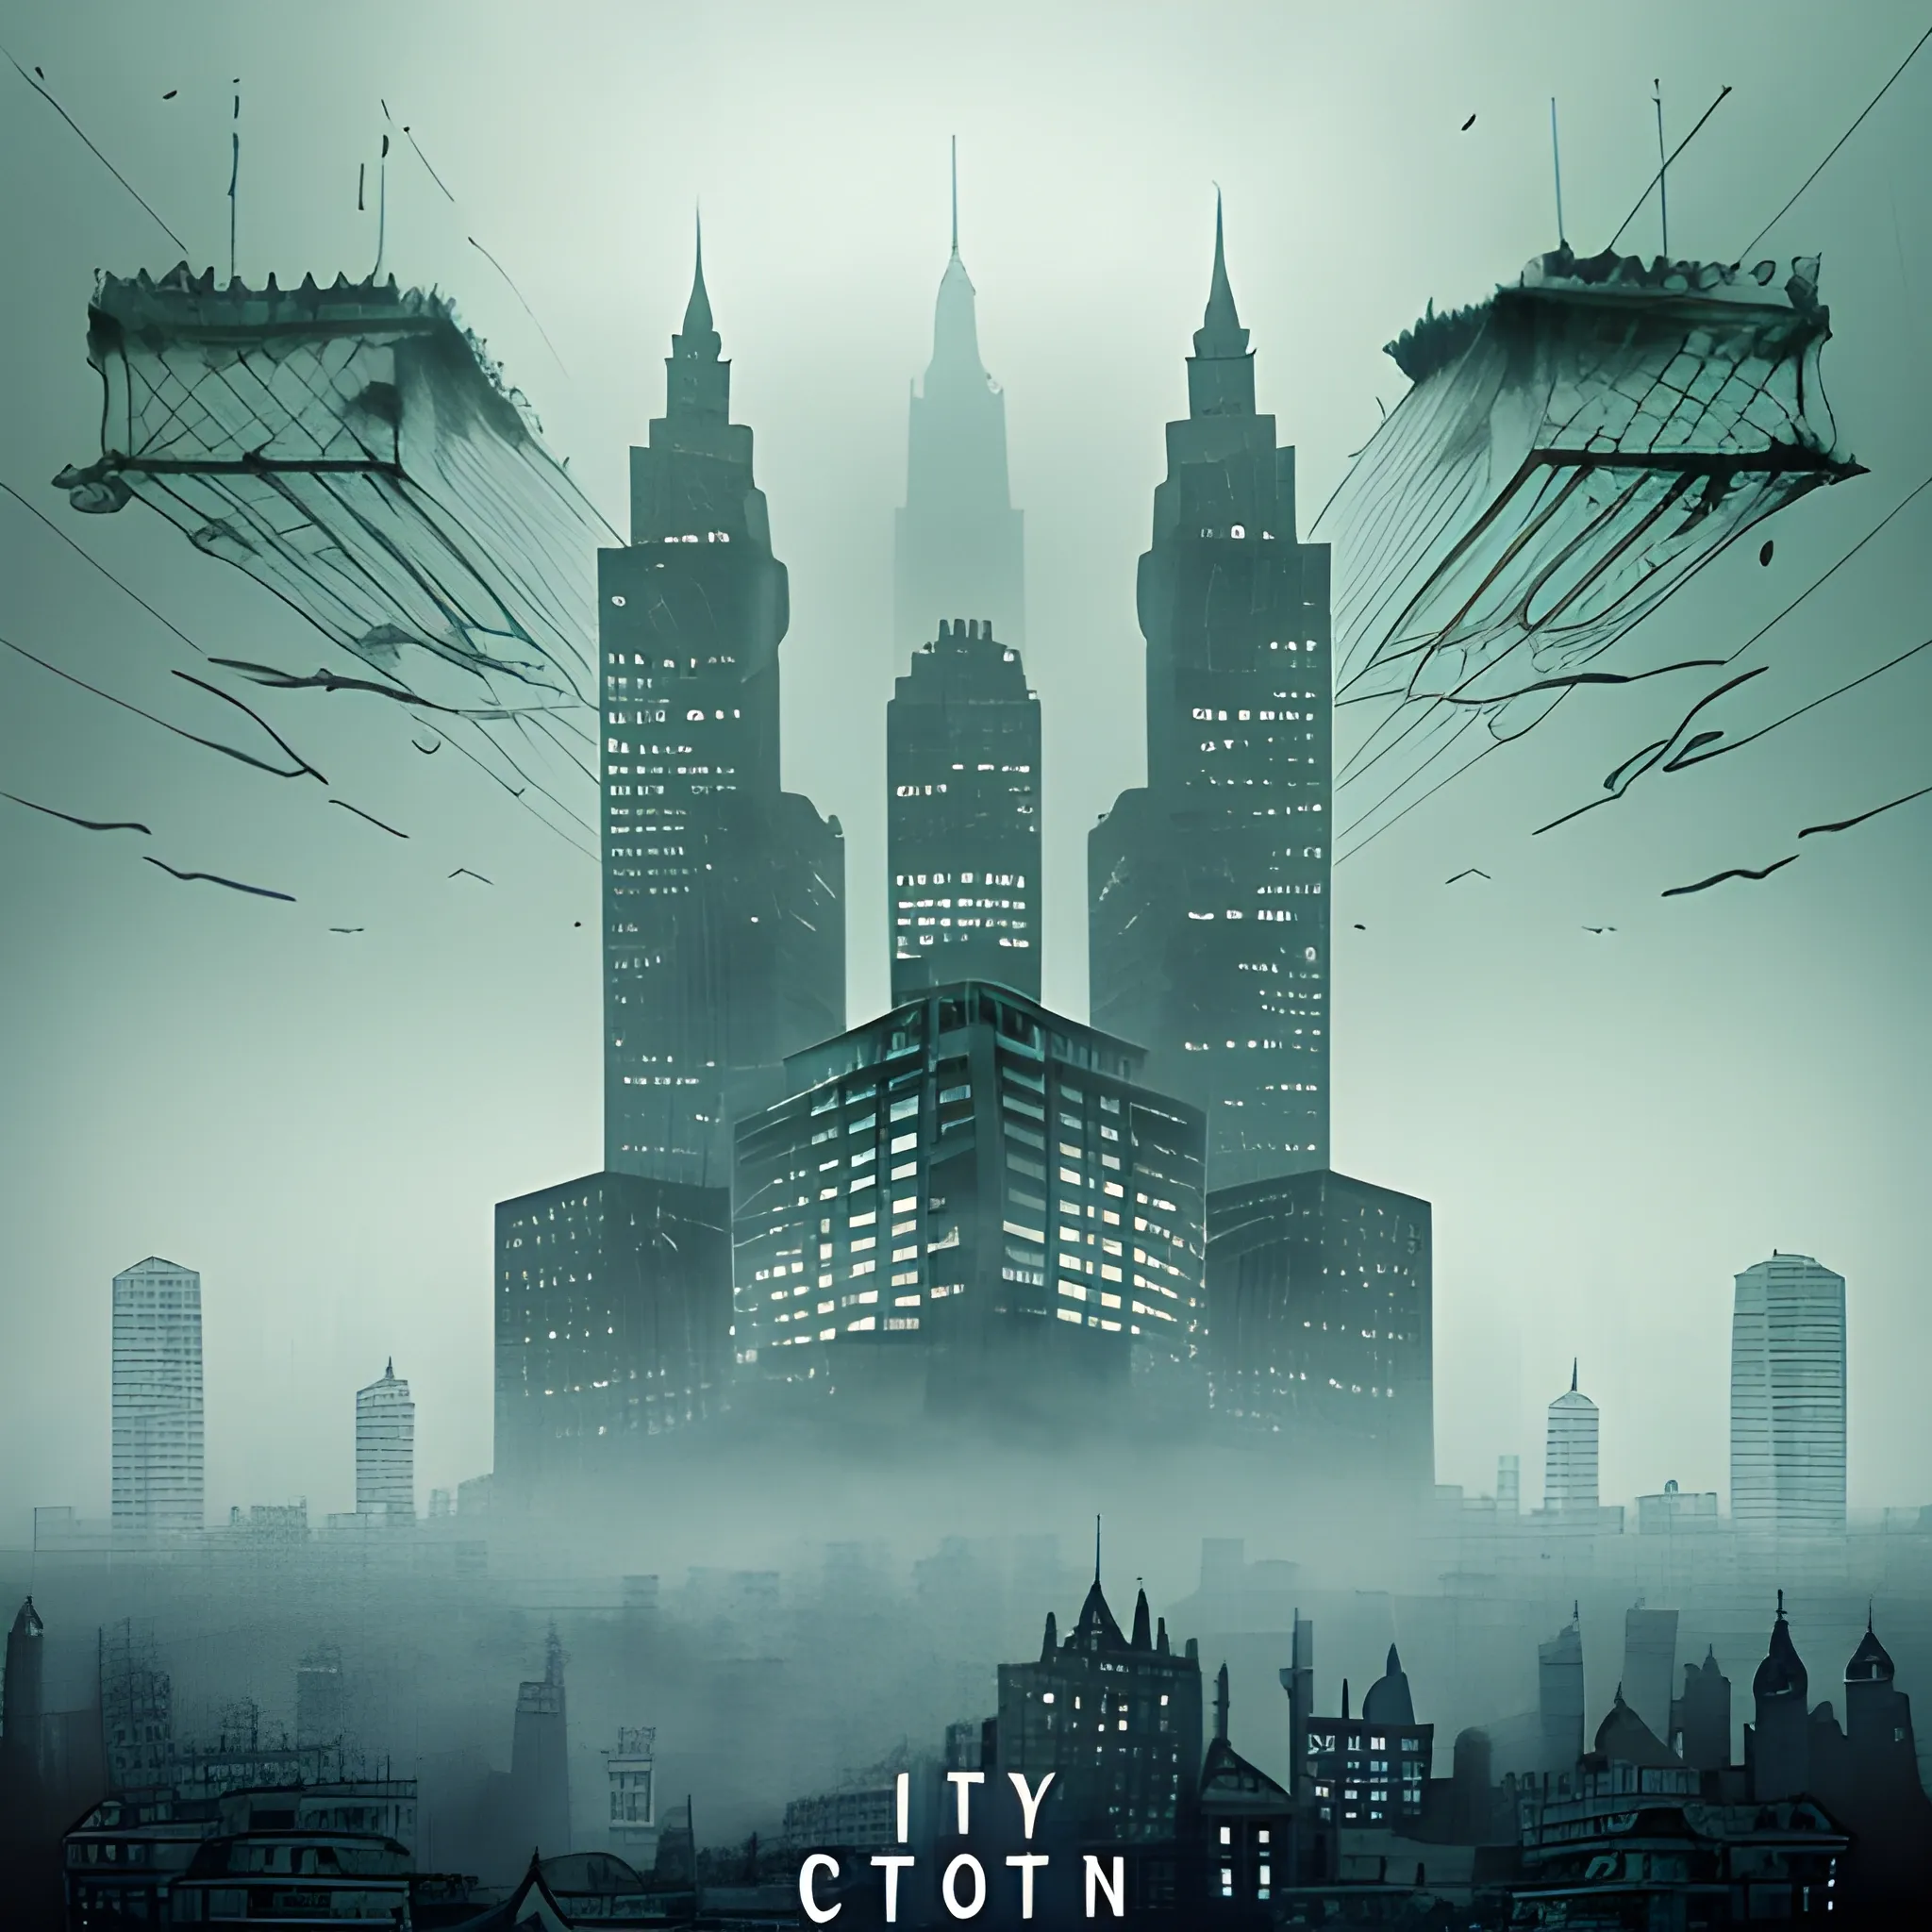 city of ghosts
